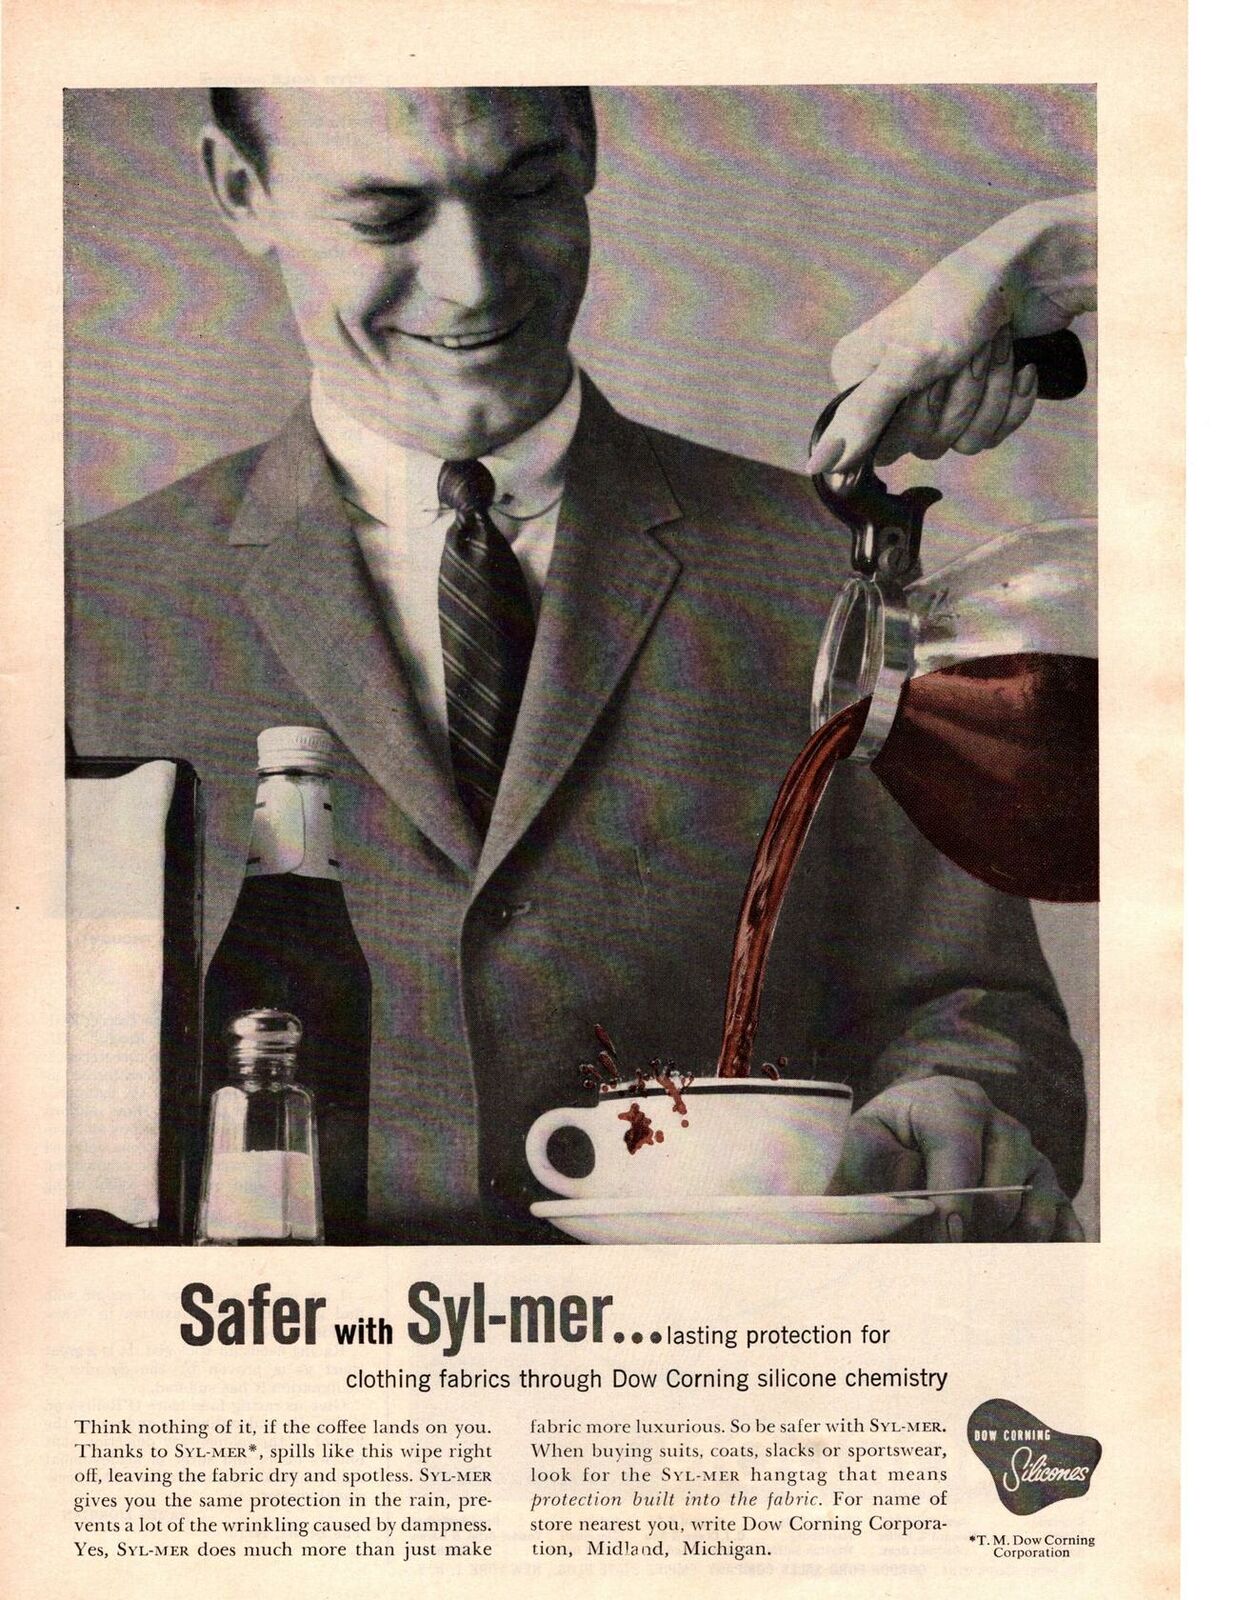 1958 Syl-Mer Clothing Fabric Dow Corning Silicone Spilled Coffee Diner Print Ad